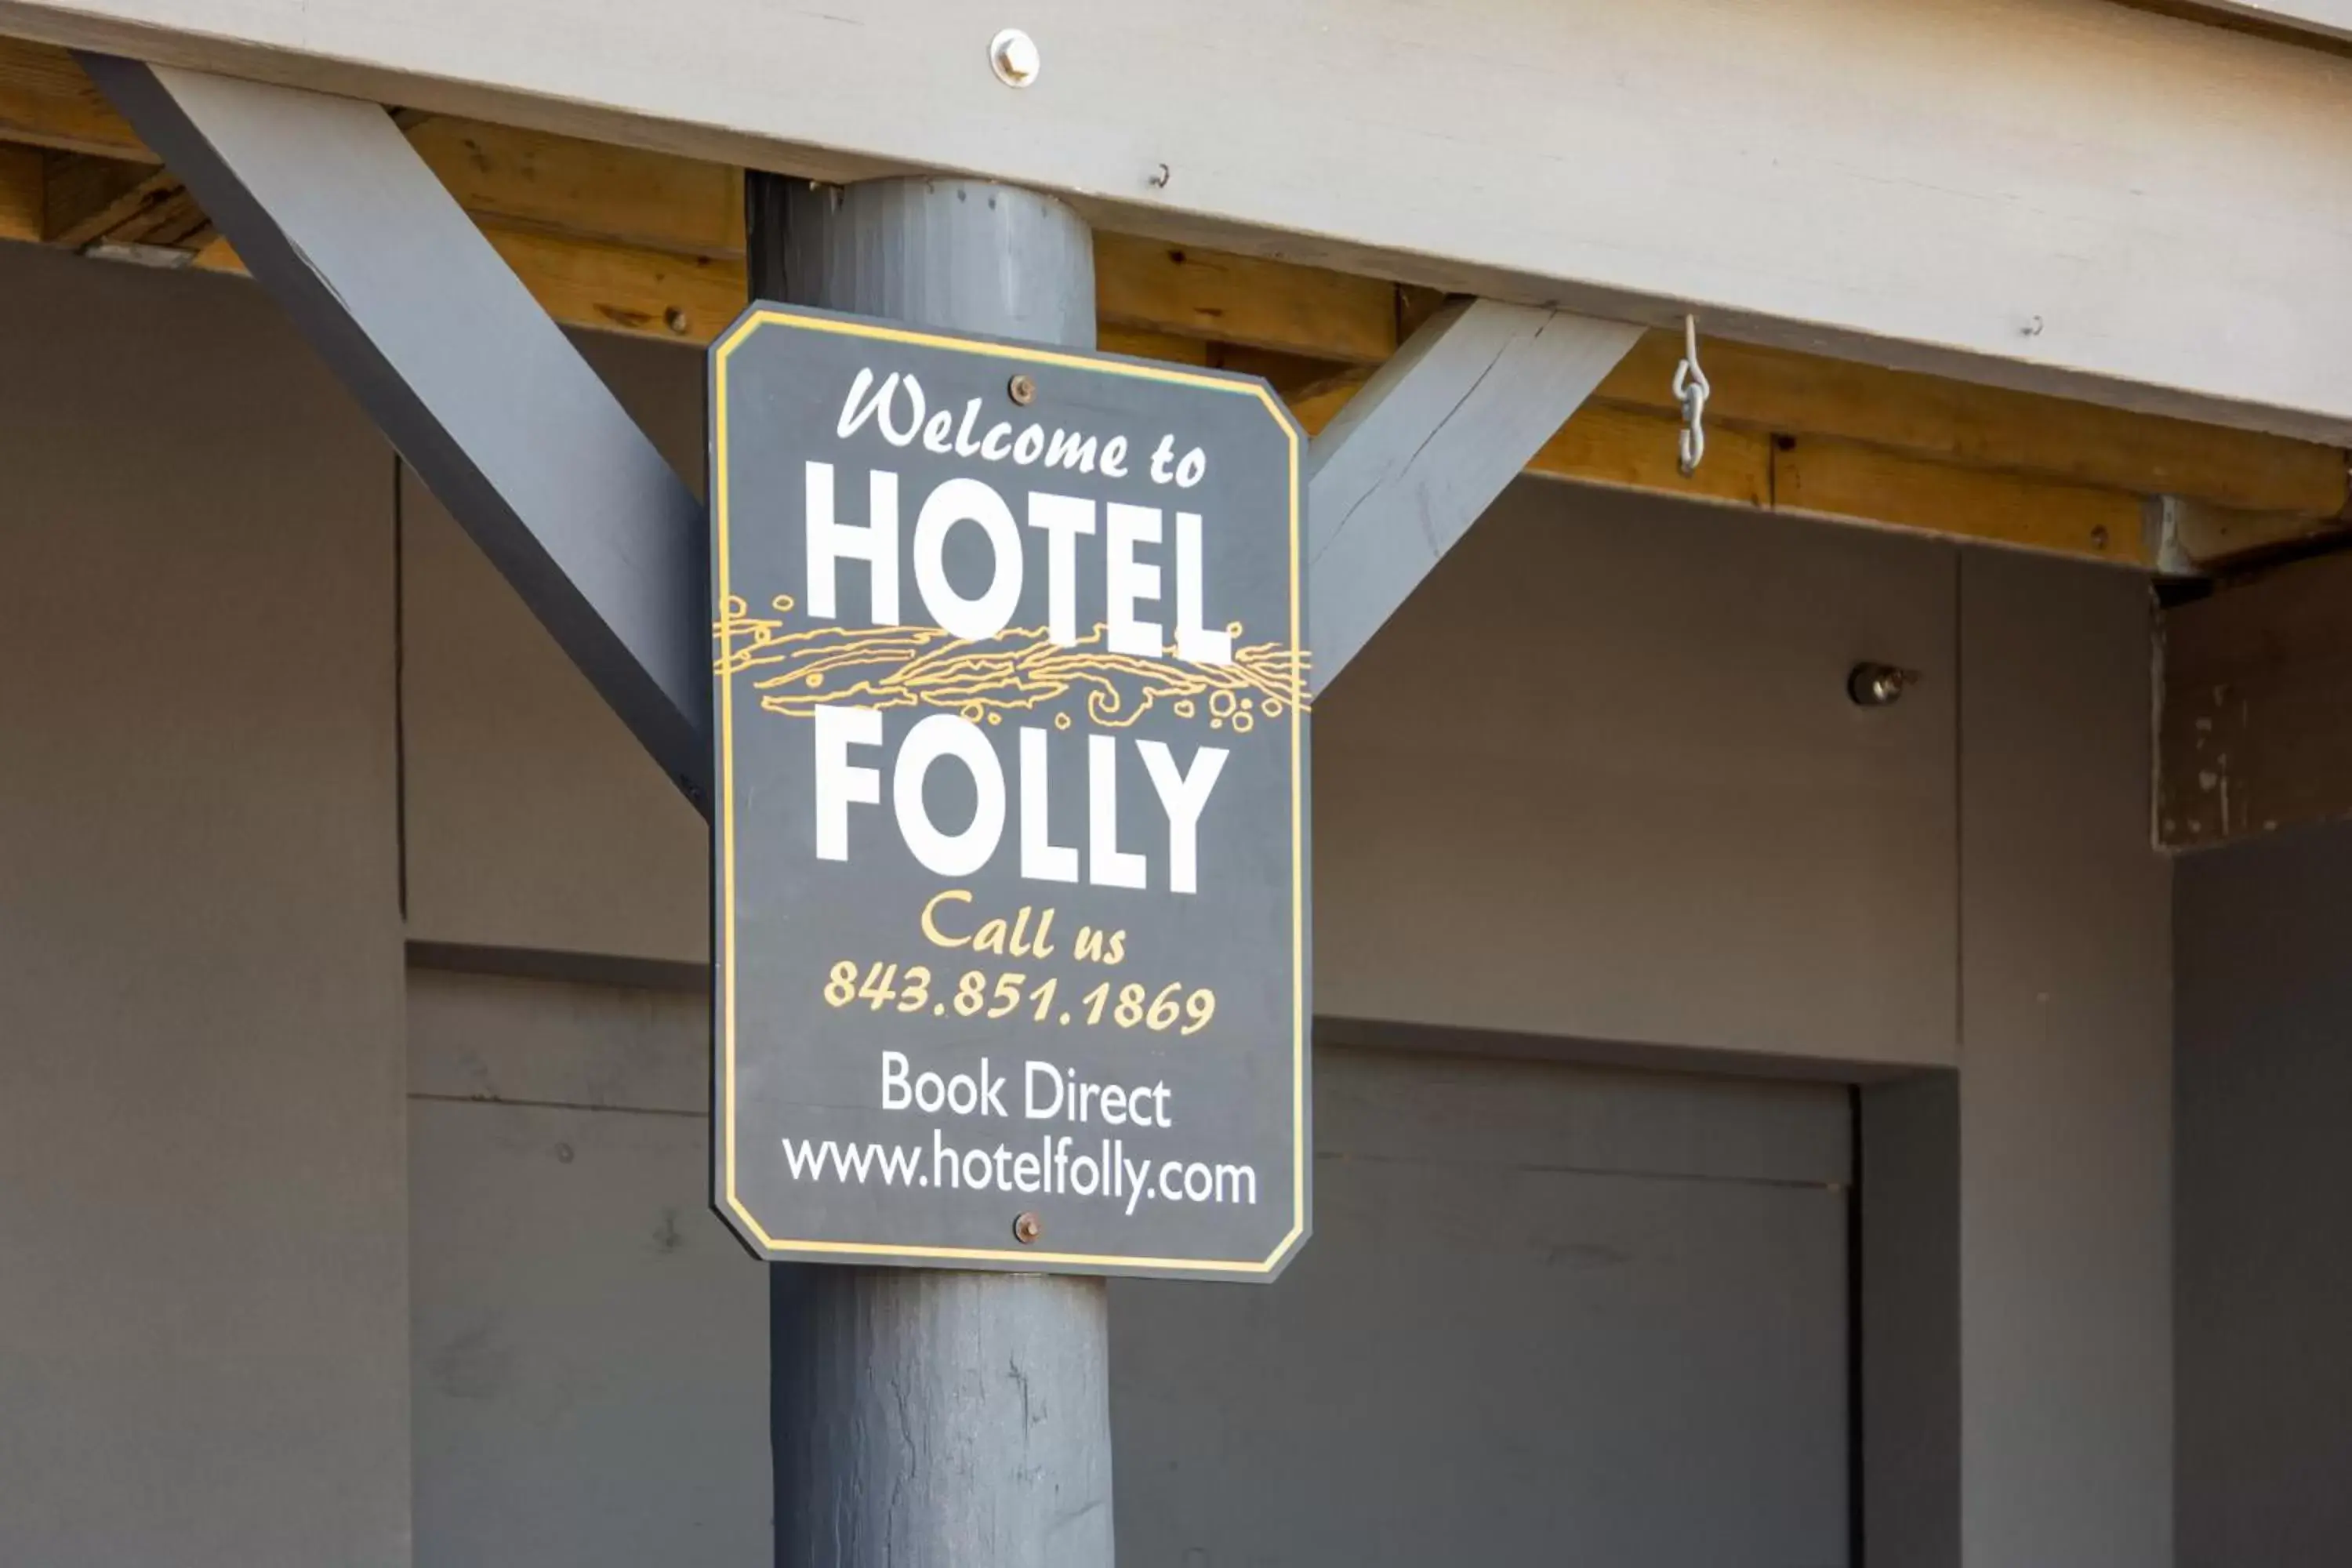 NEW Completely Renovated Hotel Folly with Sunset Views